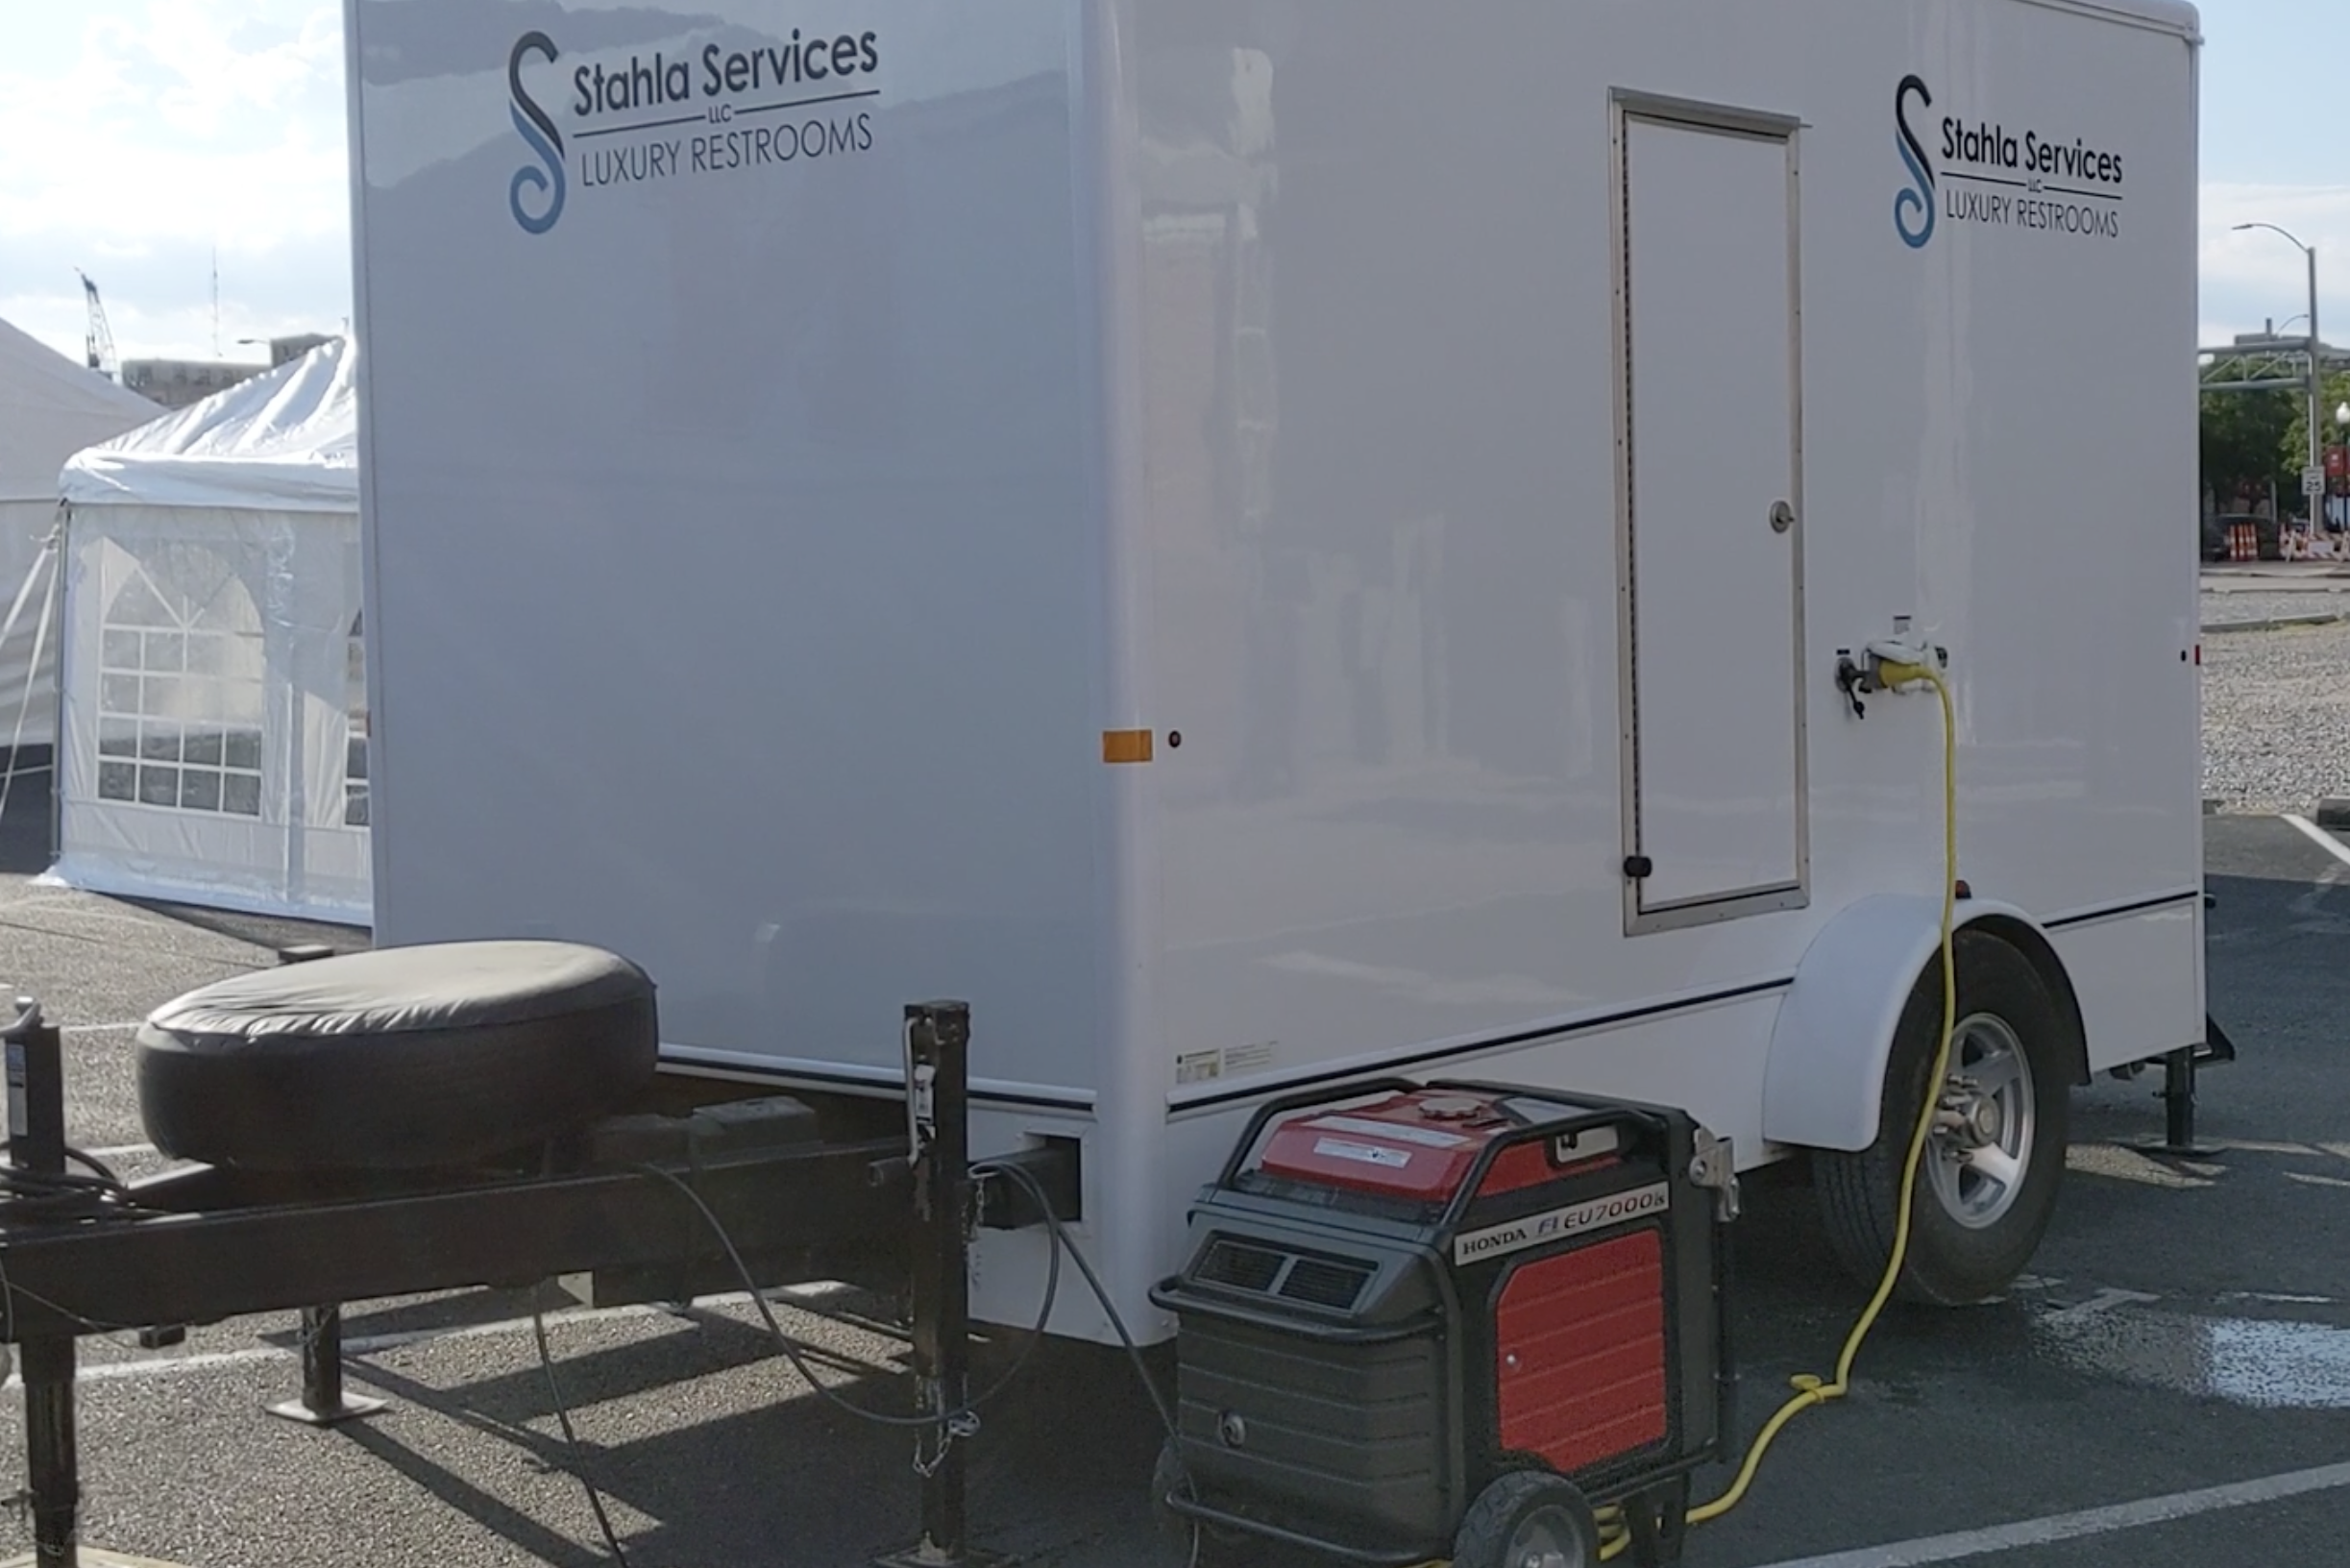 Shower and Restroom Trailer Rentals 1683039329 Screenshot 2023 05 02 at 8.55.16 AM - Renting a Luxury Restroom Trailer in Kansas City: What You Need to Know